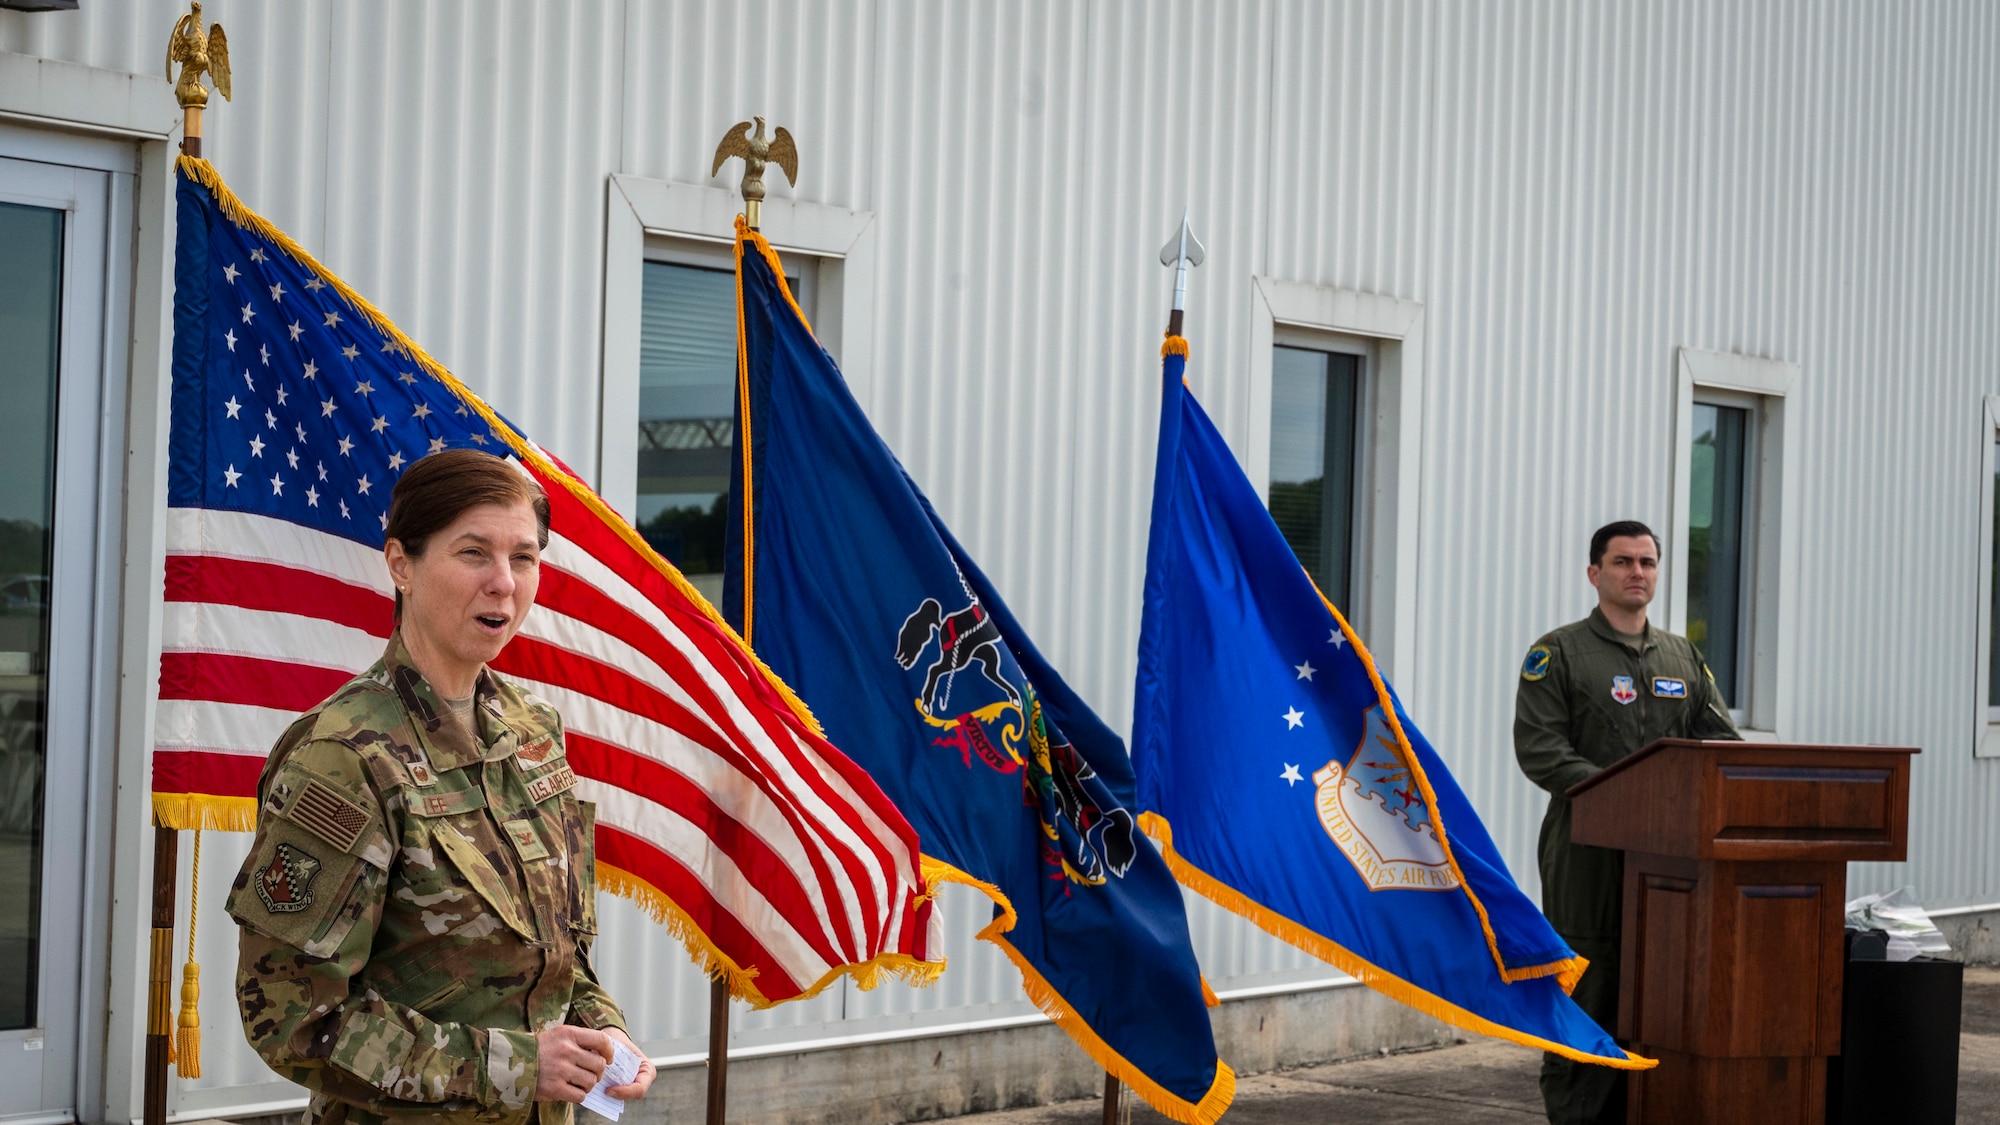 A  female colonel in USAF uniform speaks during a change of command ceremony.